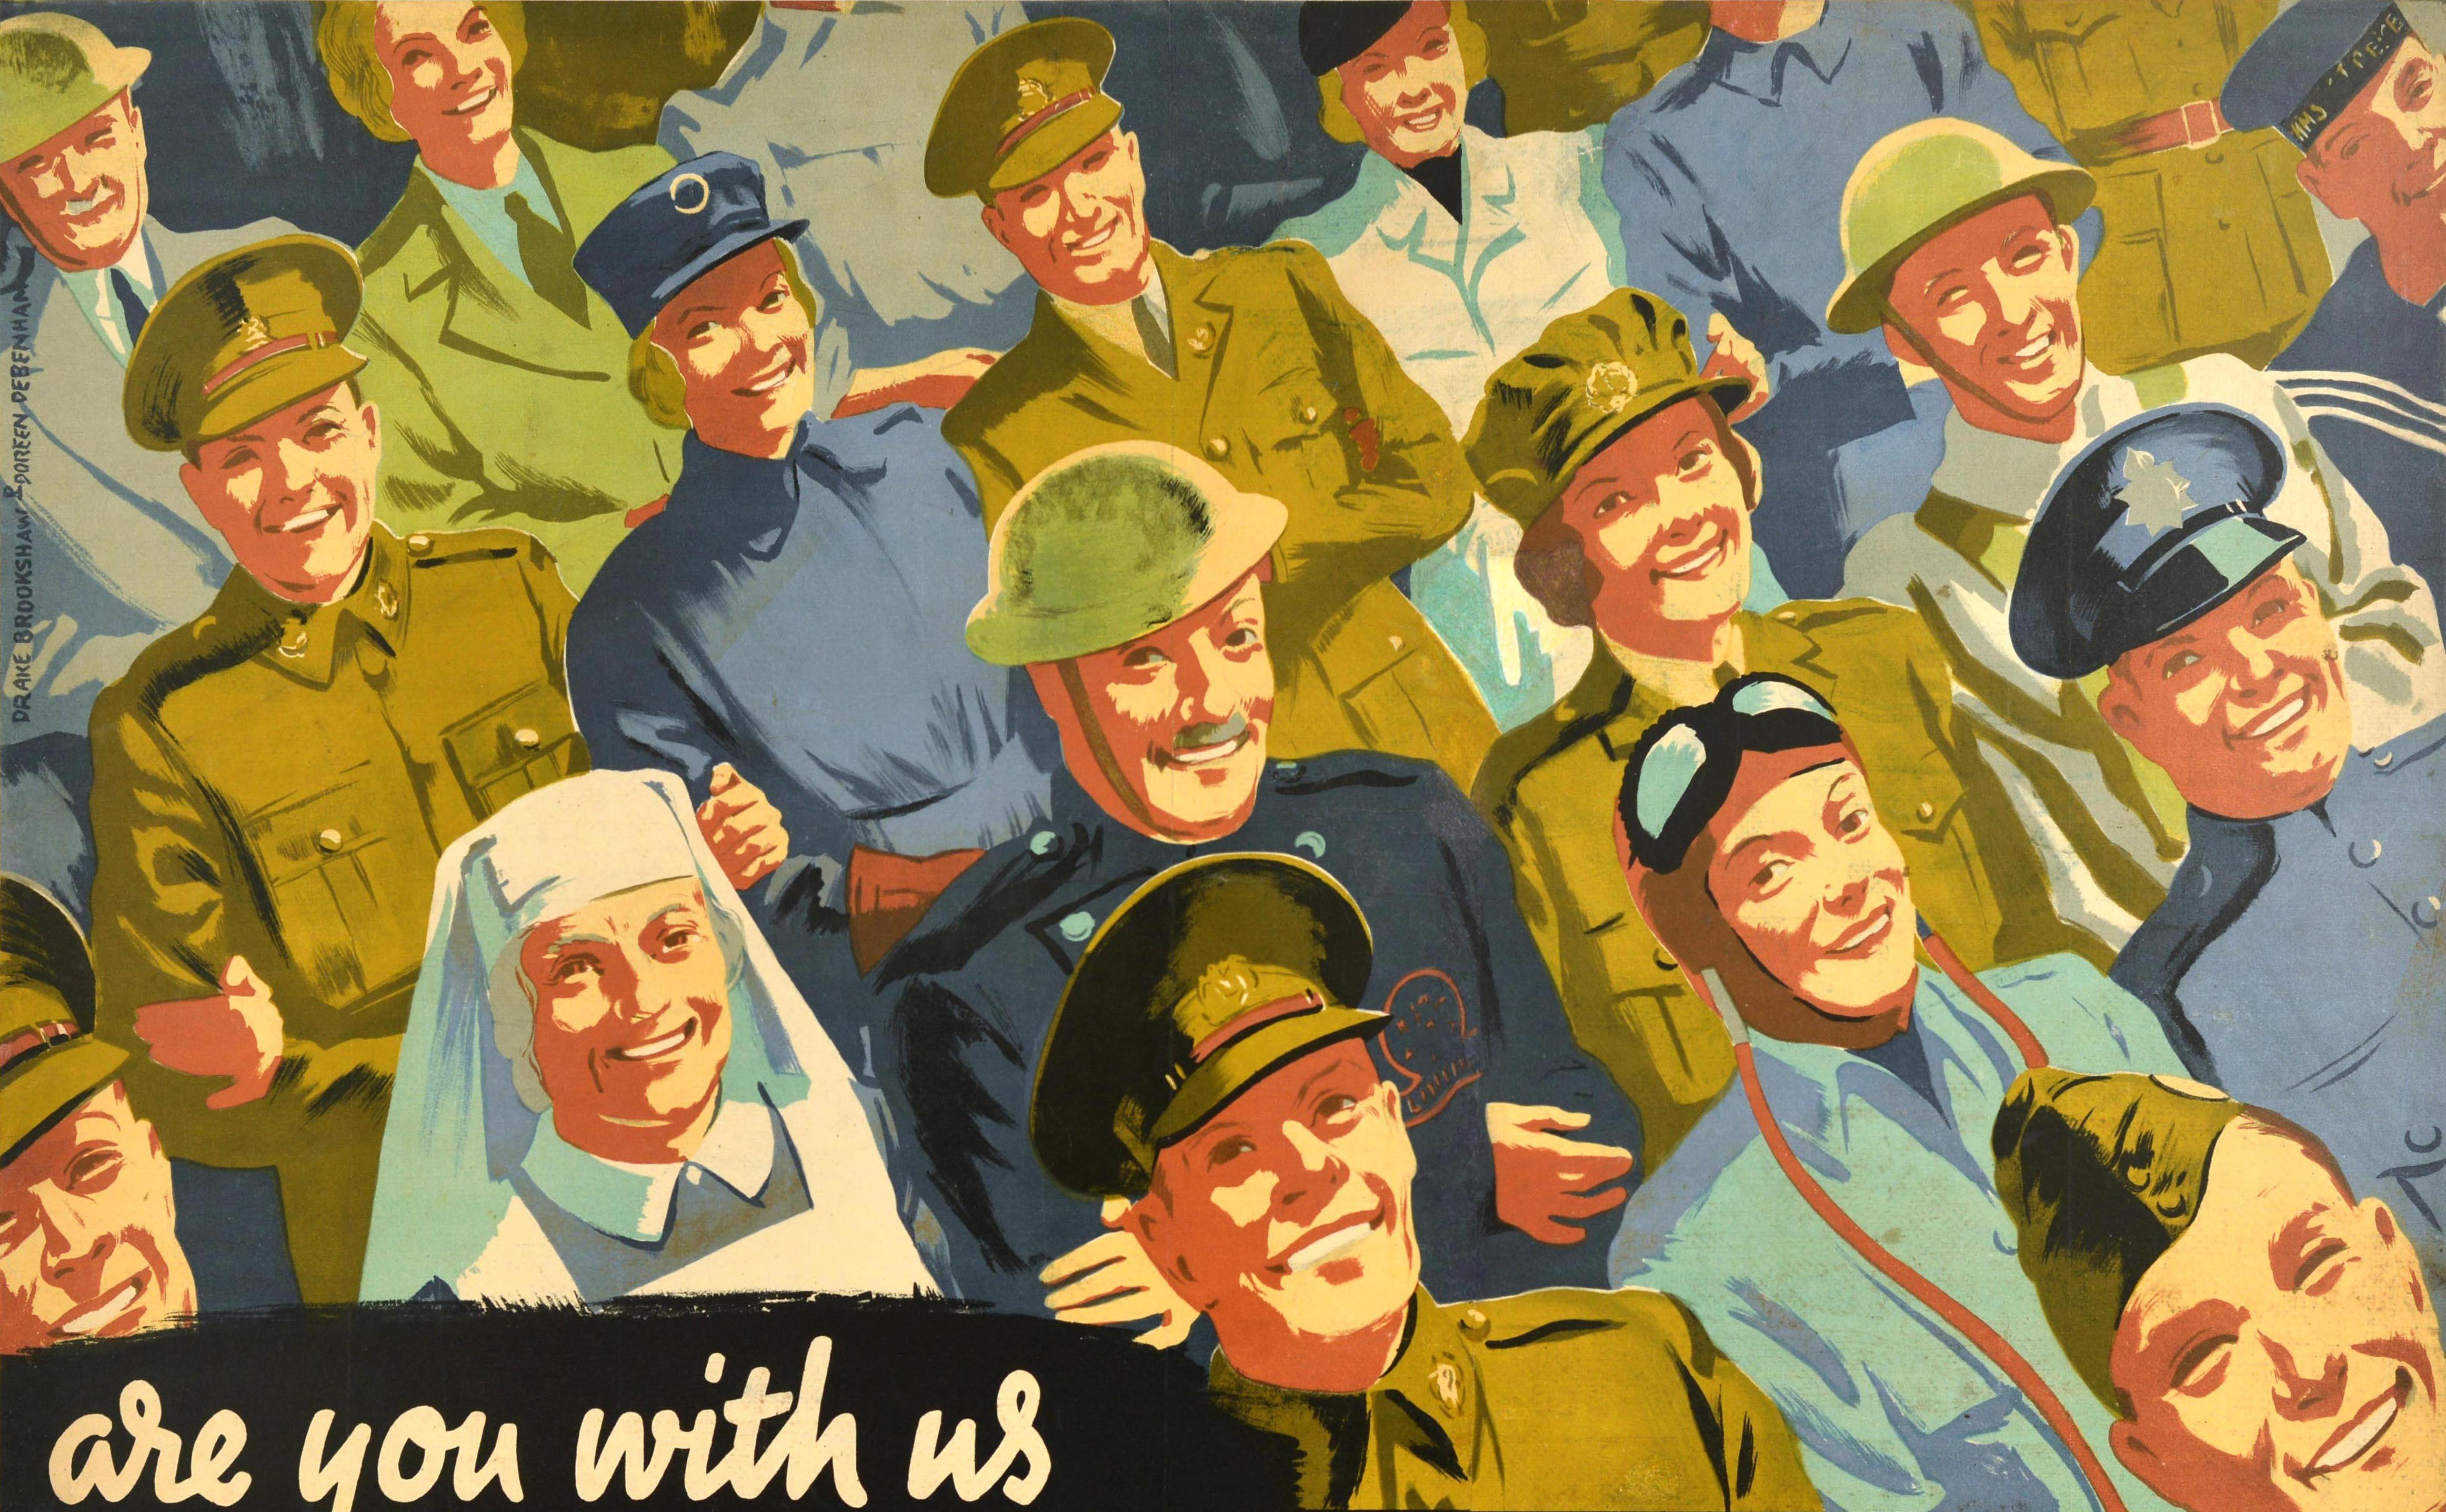 Original vintage British propaganda poster - Are you with us in National Service? Colourful image showing smiling men and women in uniform looking up to the viewer with their arms linked together, including military officers, soldiers, pilots,